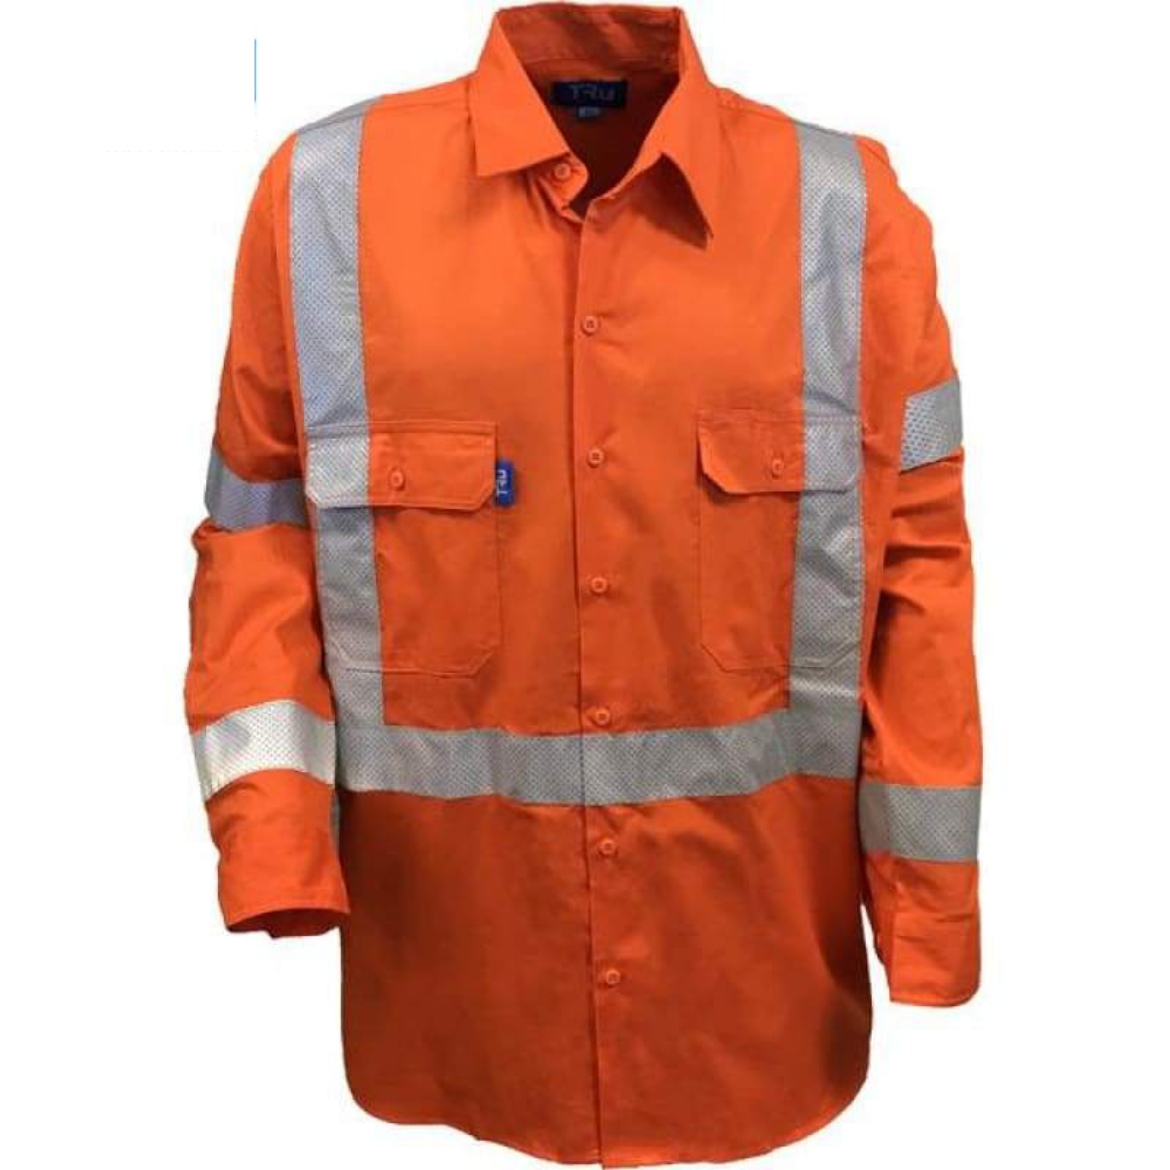 Picture of Tru Workwear, Shirt, Long Sleeve, Light Cotton Drill, Vents, NSW Rail